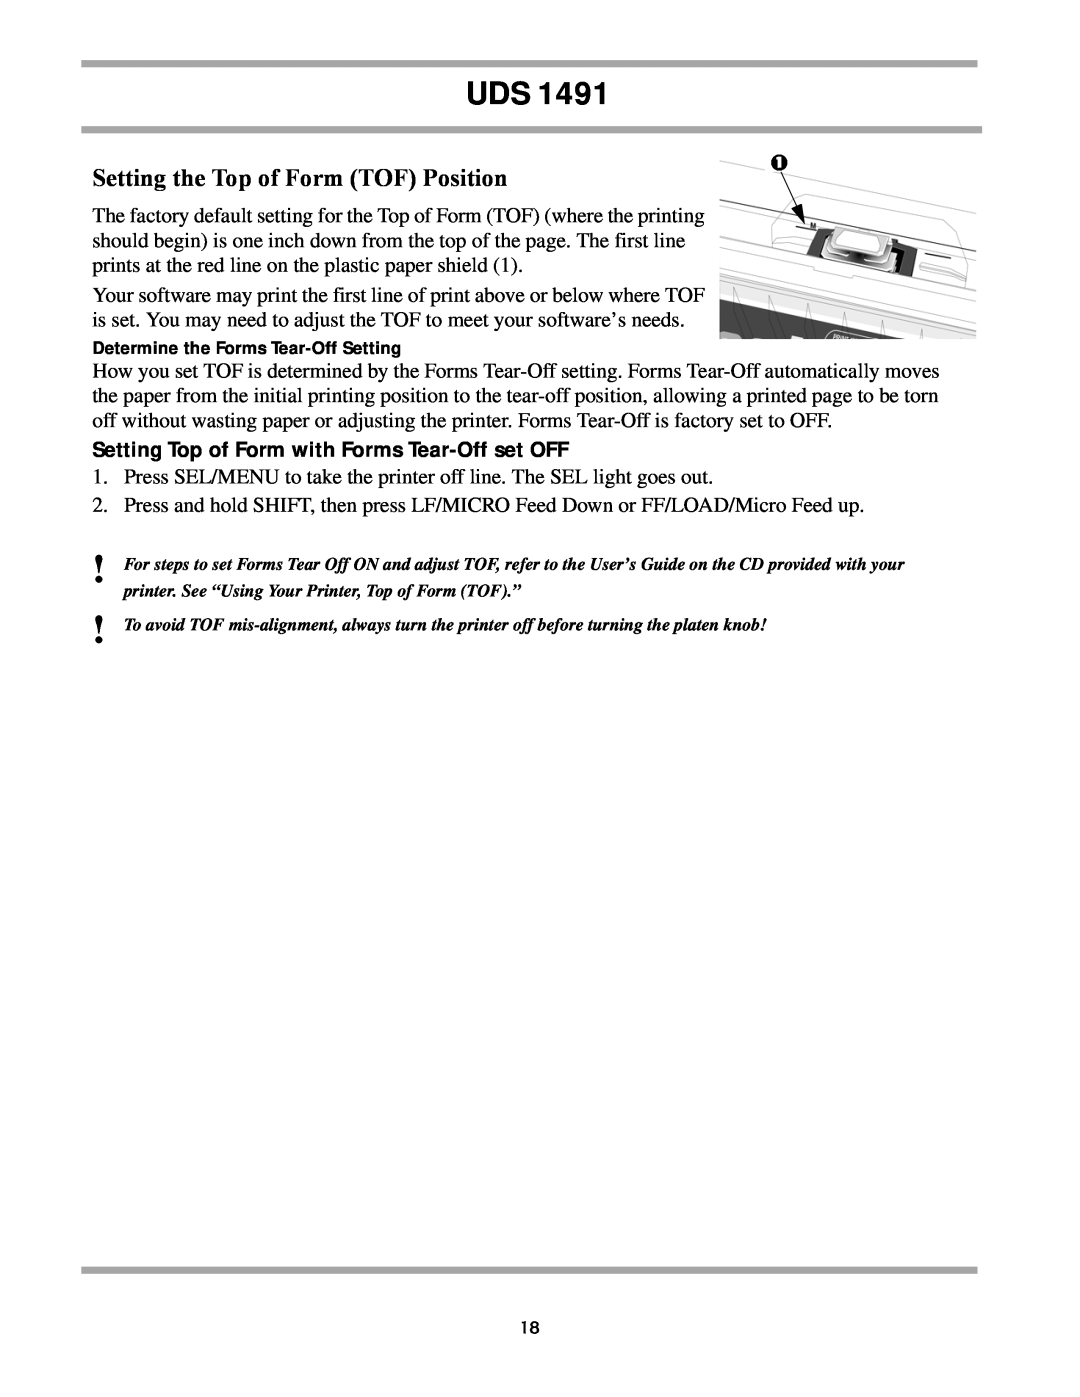 Unisys UDS 1491 setup guide Setting the Top of Form TOF Position, Setting Top of Form with Forms Tear-Off set OFF 